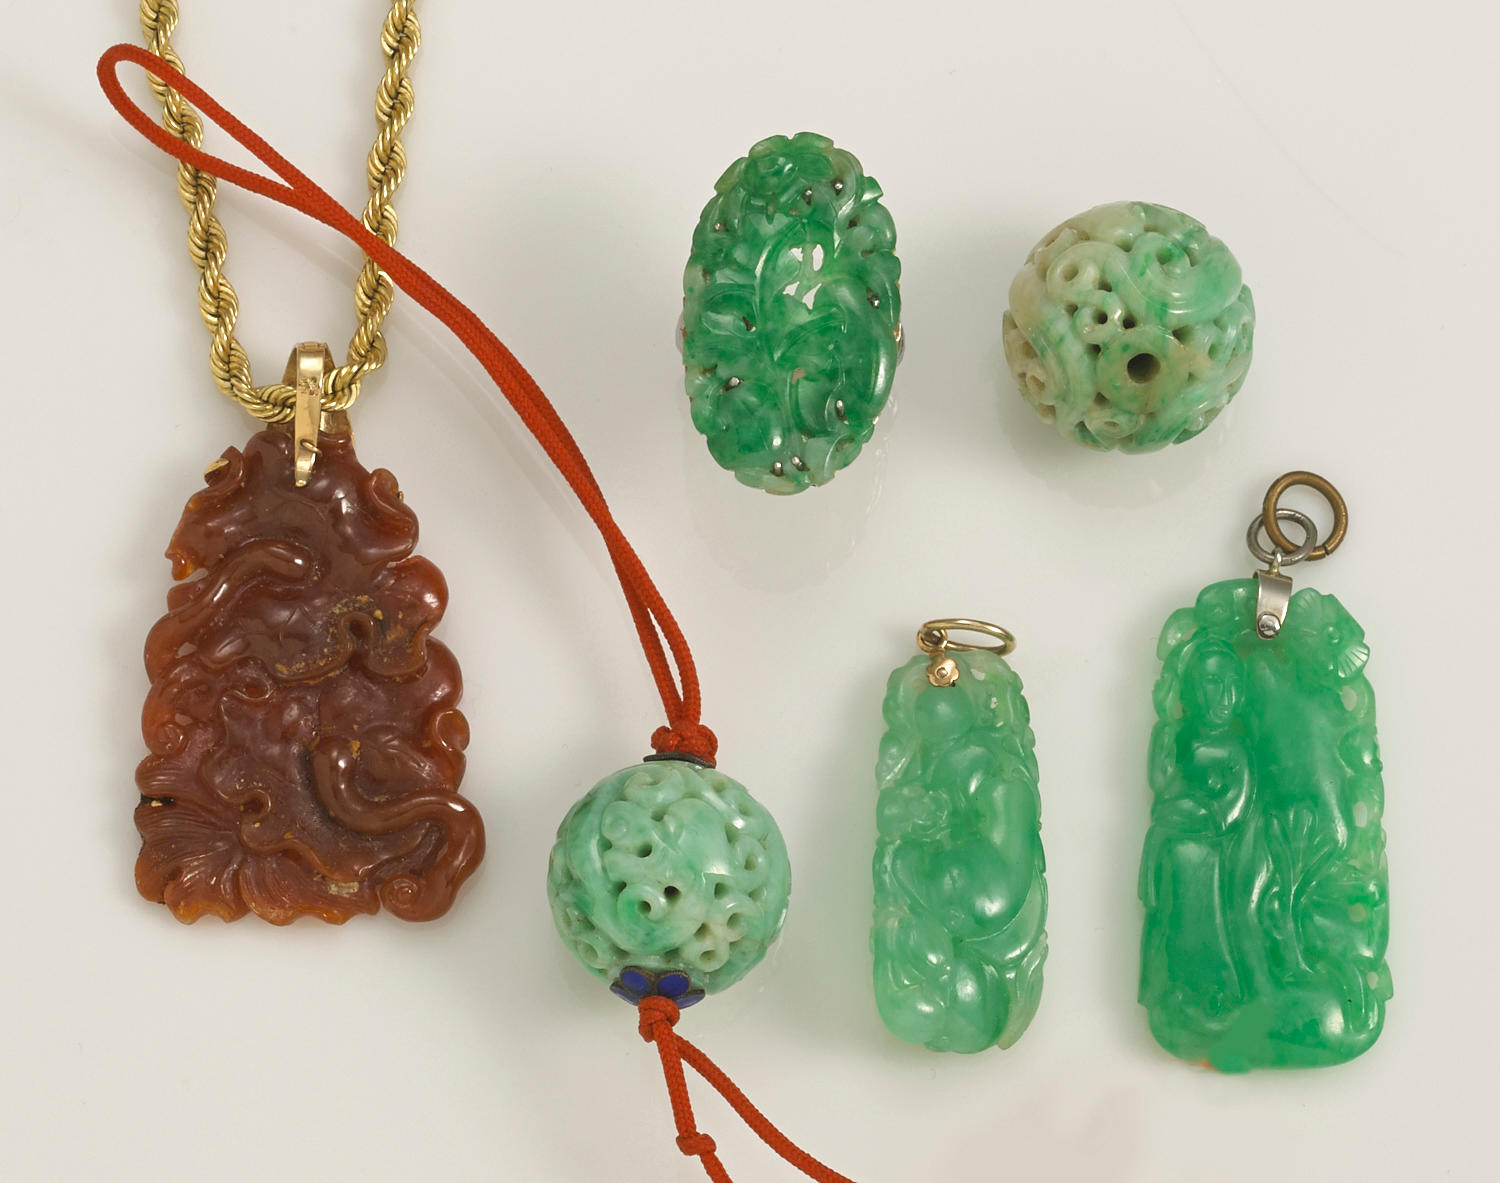 A collection of jadeite jade, 14k and 10k gold jewelry and jewelry components